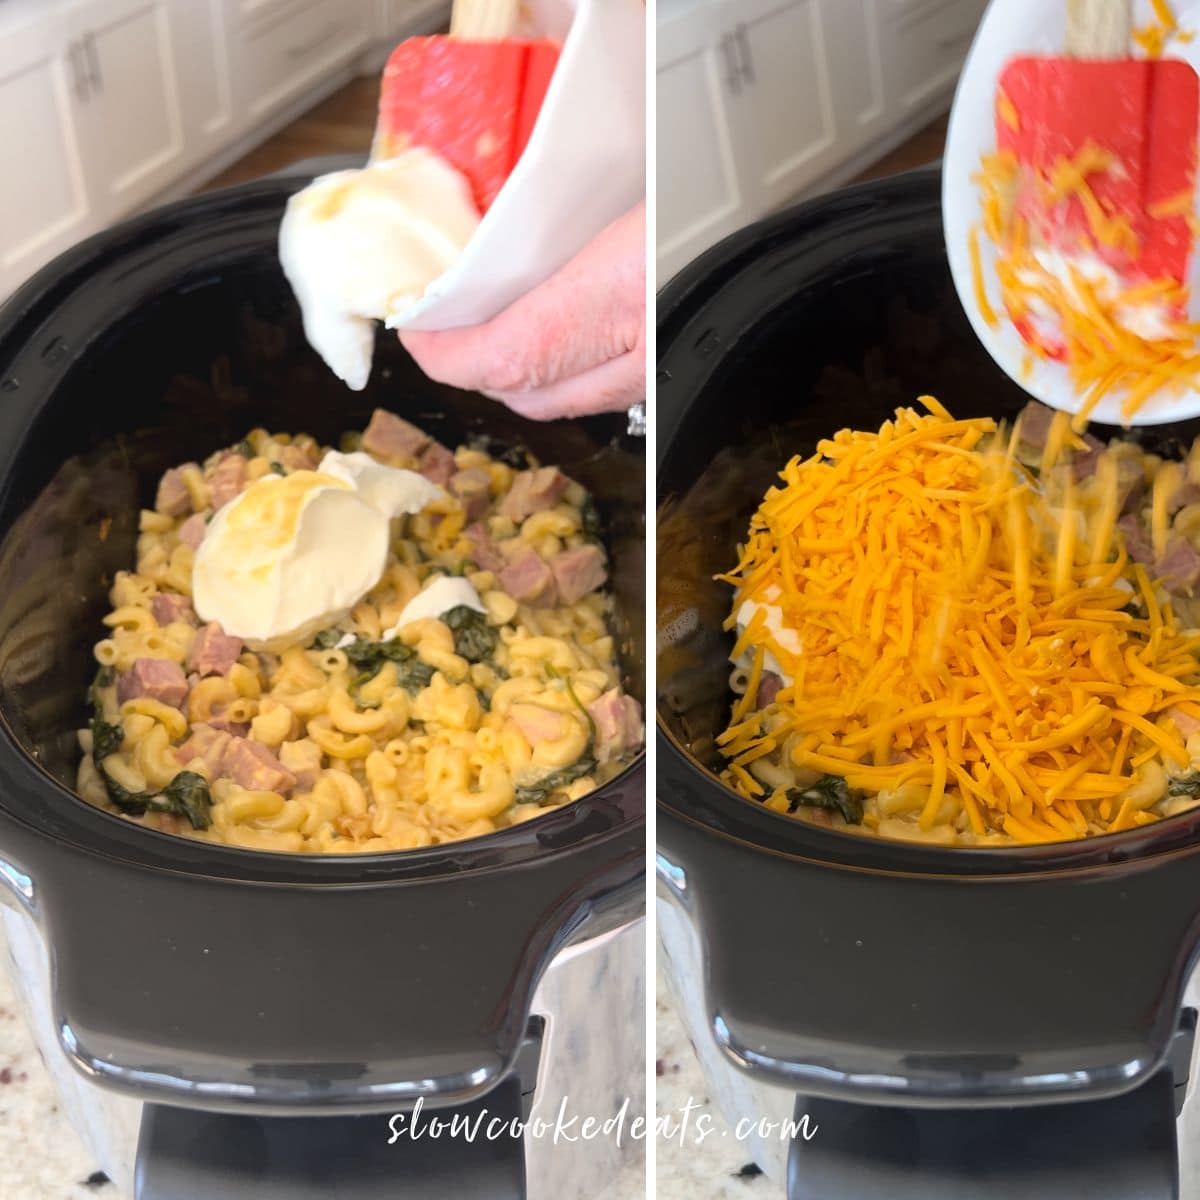 Adding the remaining ingredients and cheese to melt into the cooked pasta.